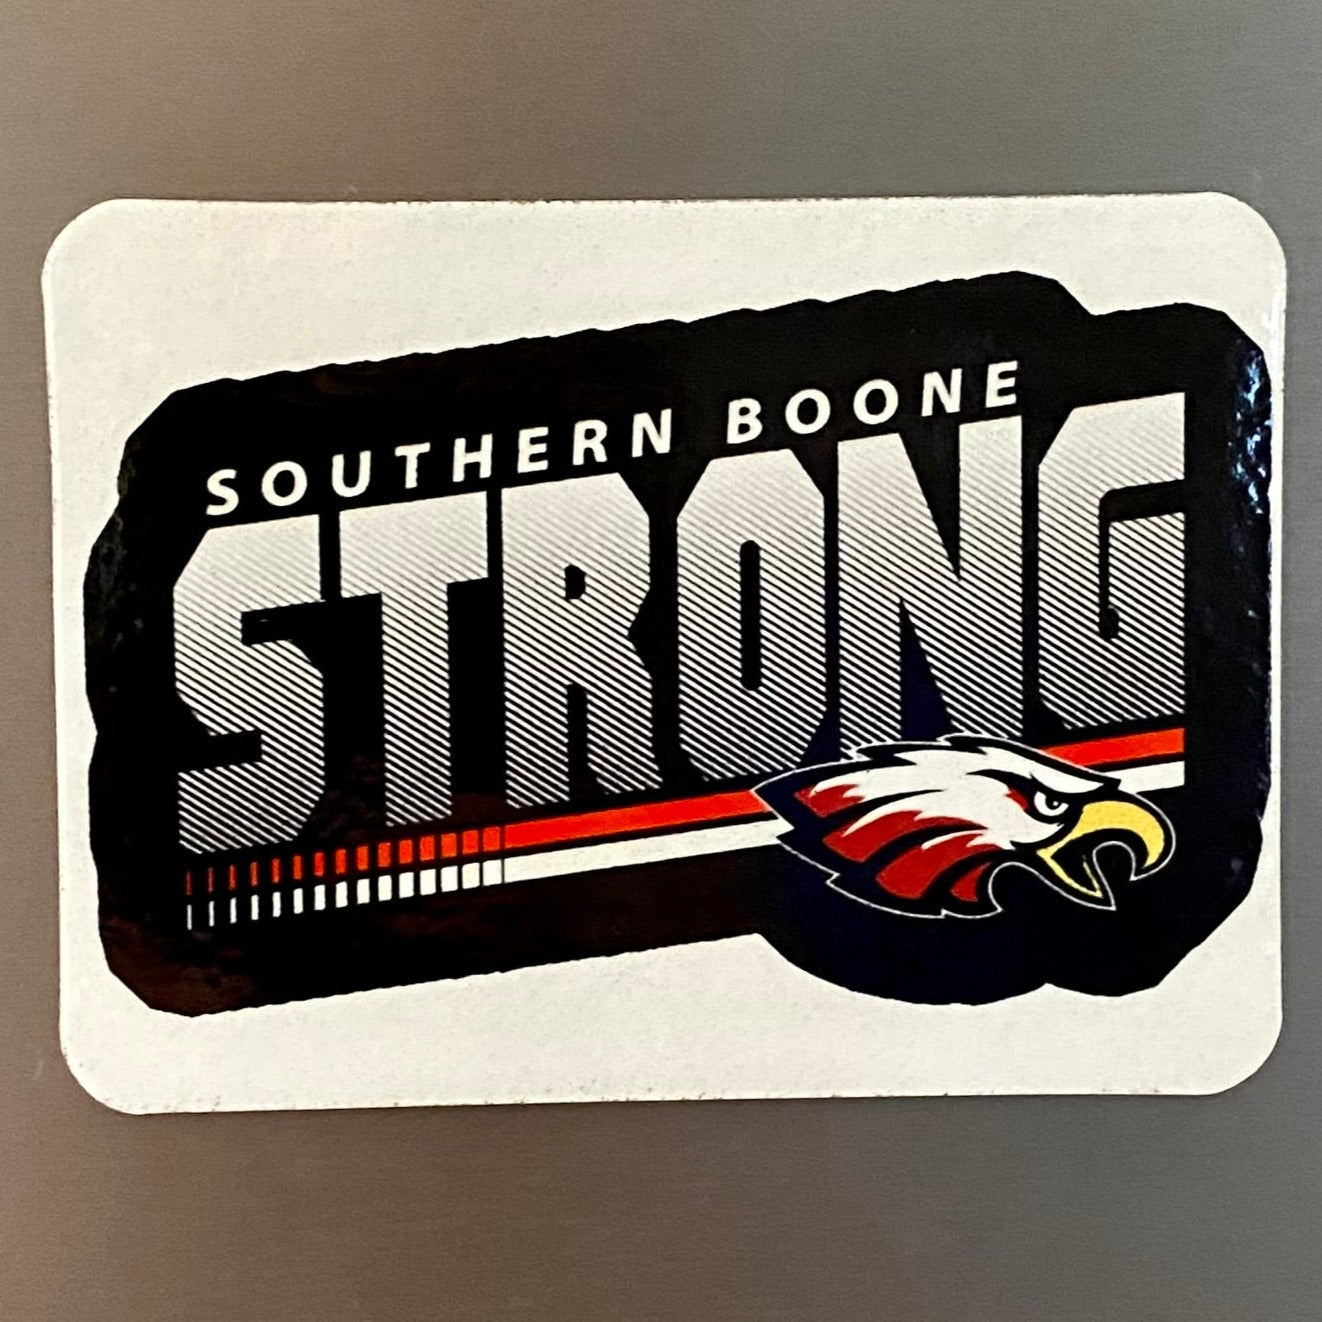 Southern Boone Strong Fridge Magnet